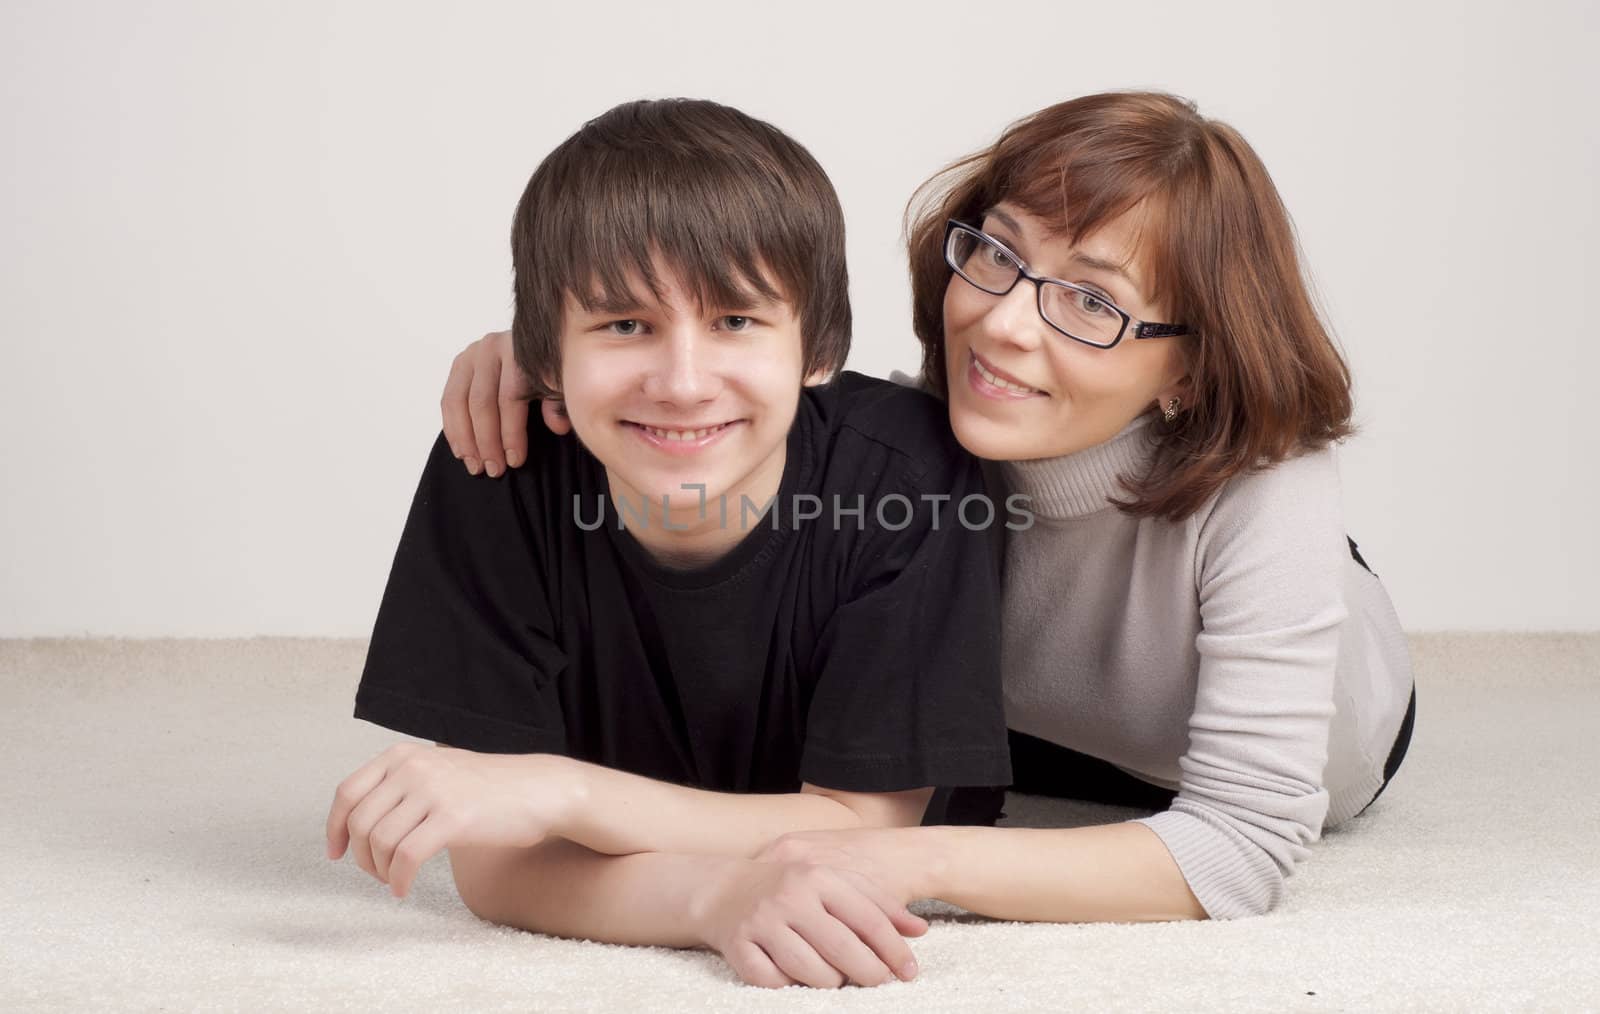 mother and son are together and smile in studio